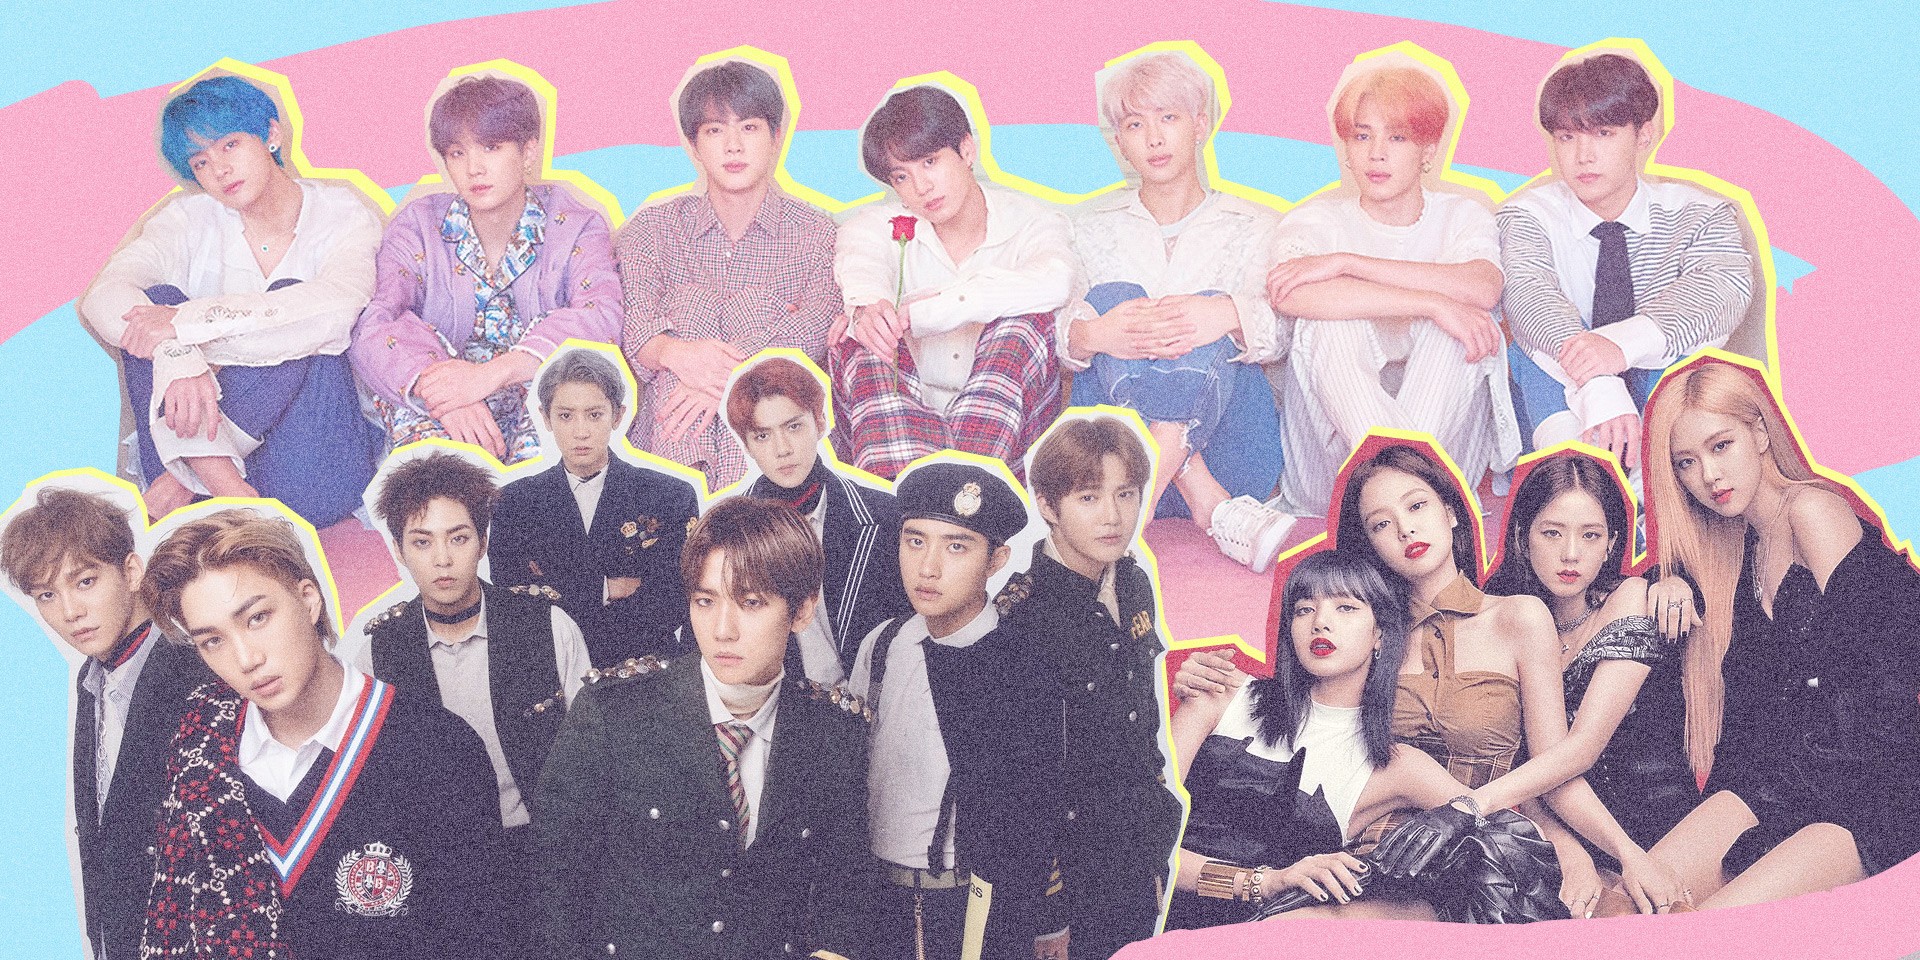 Bts Exo And Blackpink Are The Philippines Top Tweeted K Pop Acts In